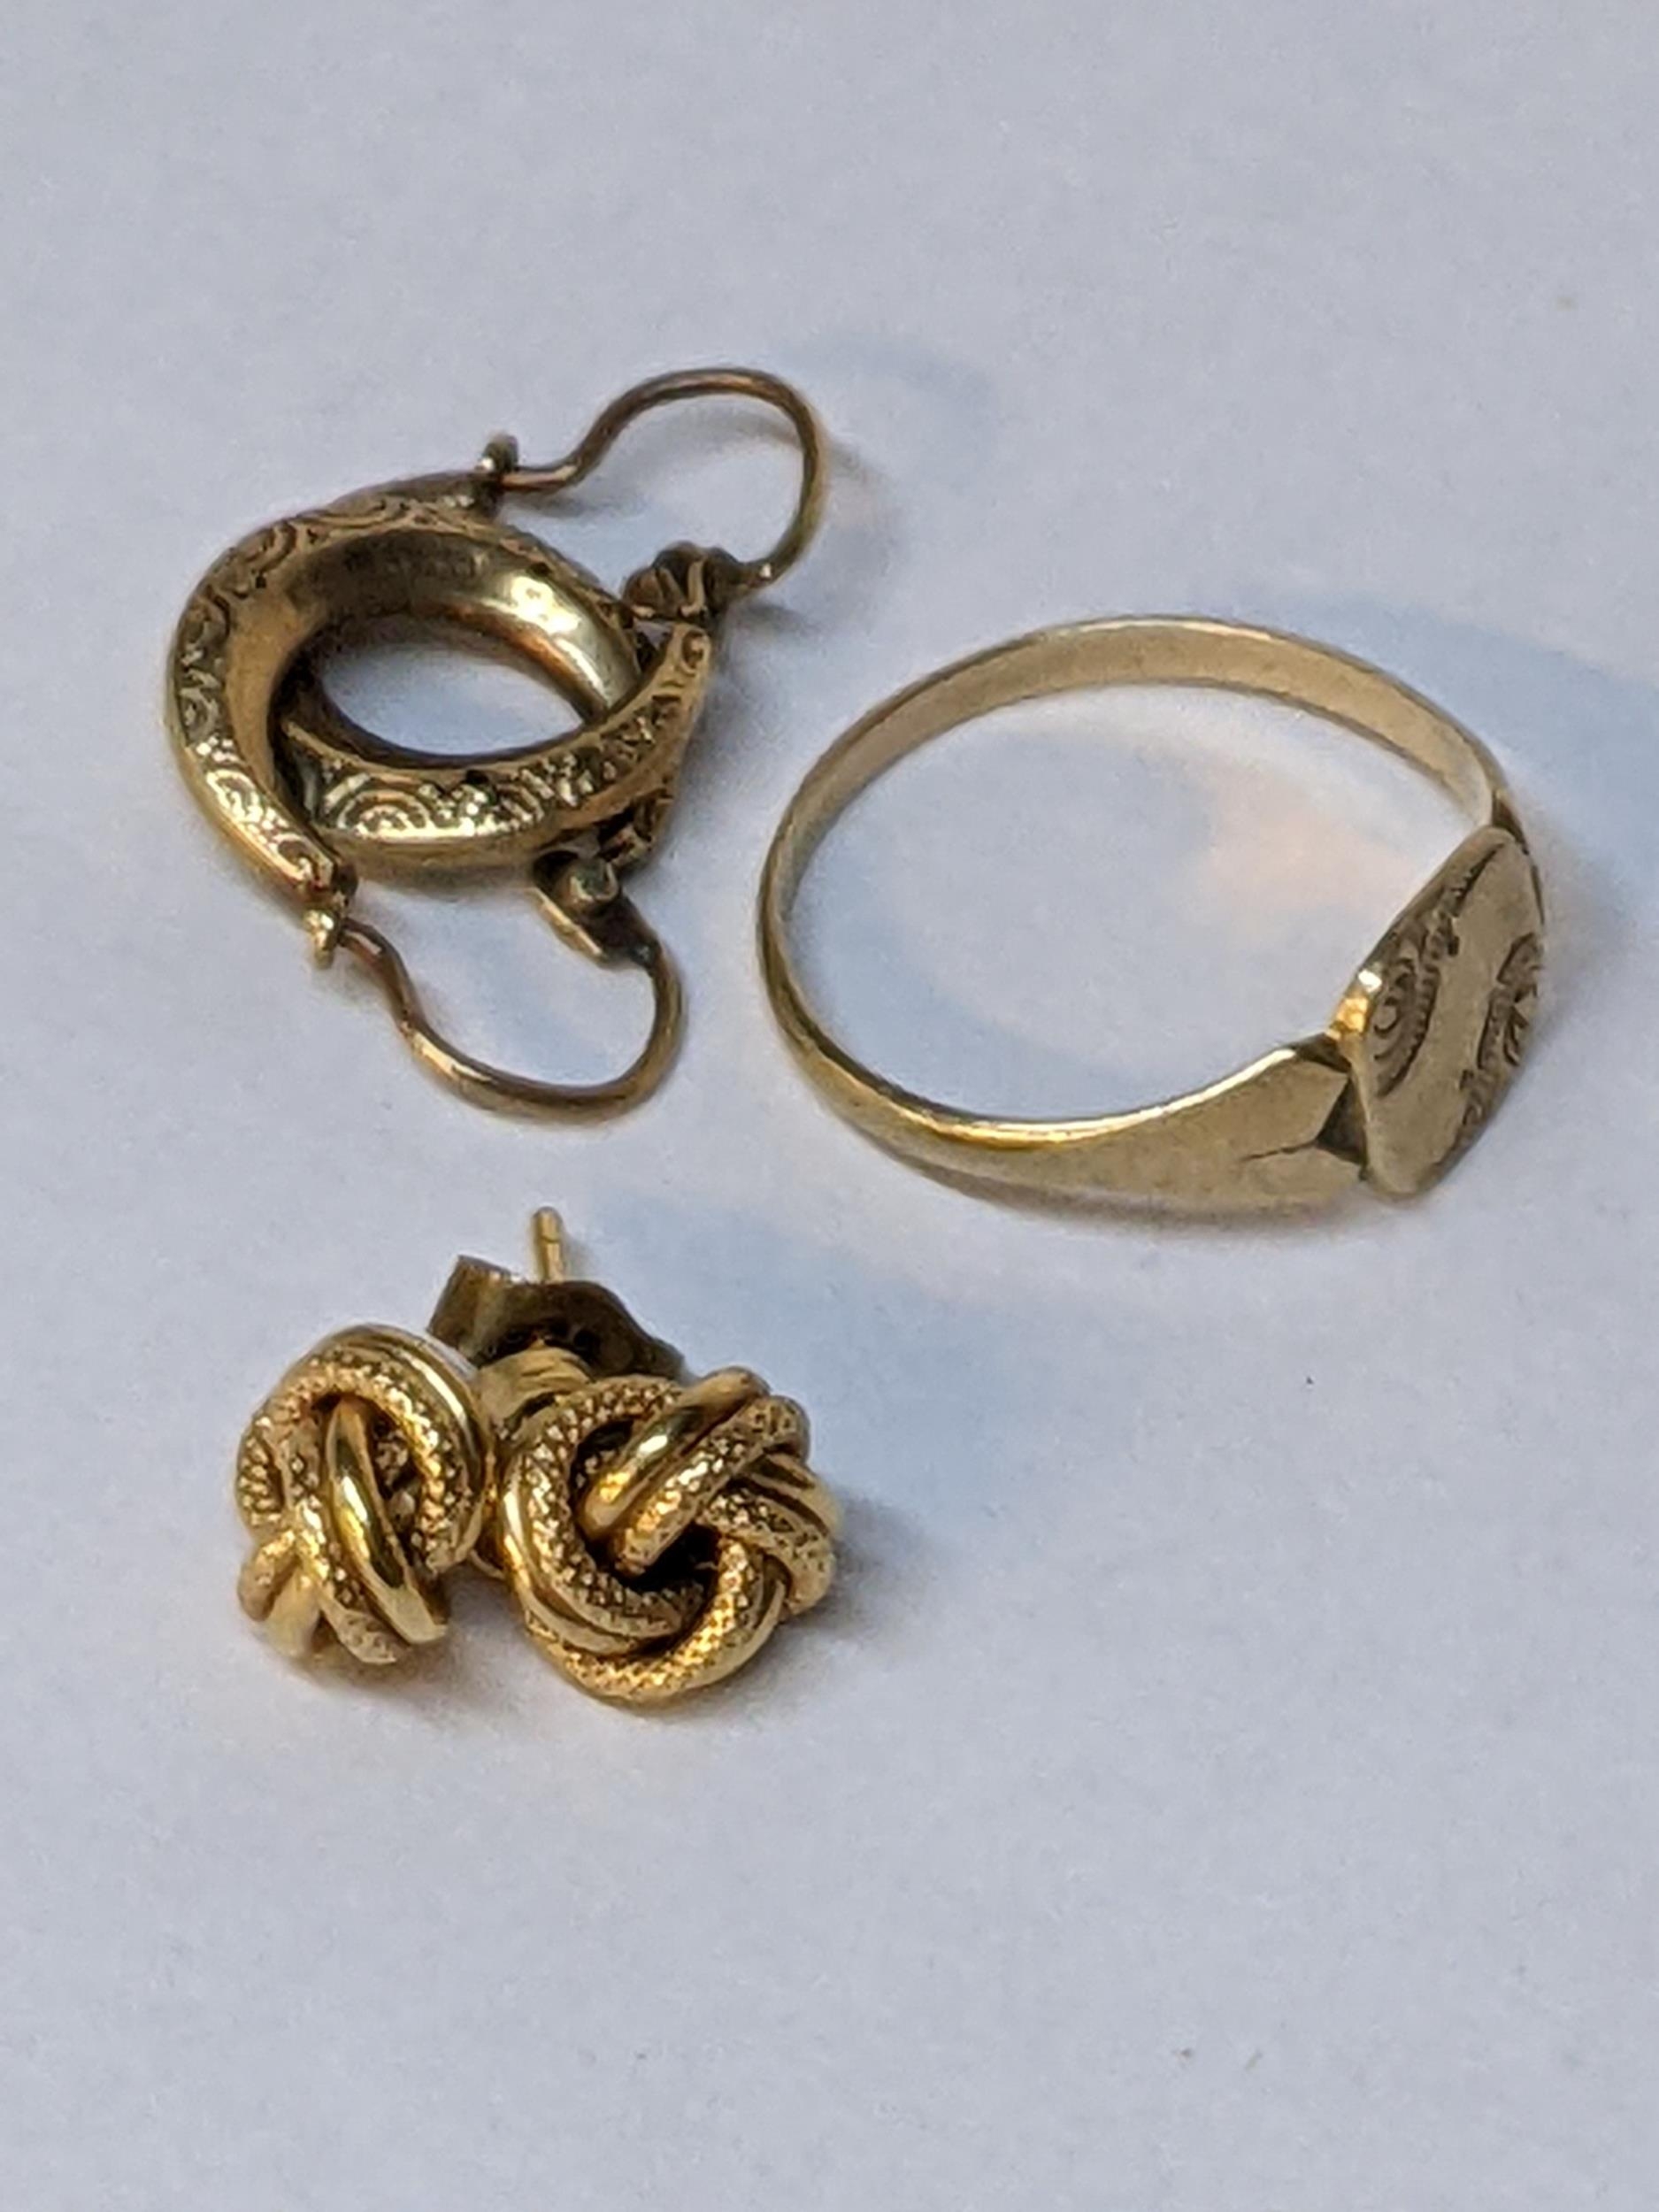 A 9ct gold signet ring, 1.4g and 9ct gold earrings, 0.9g, and another set of 9ct gold earrings, 1.2g